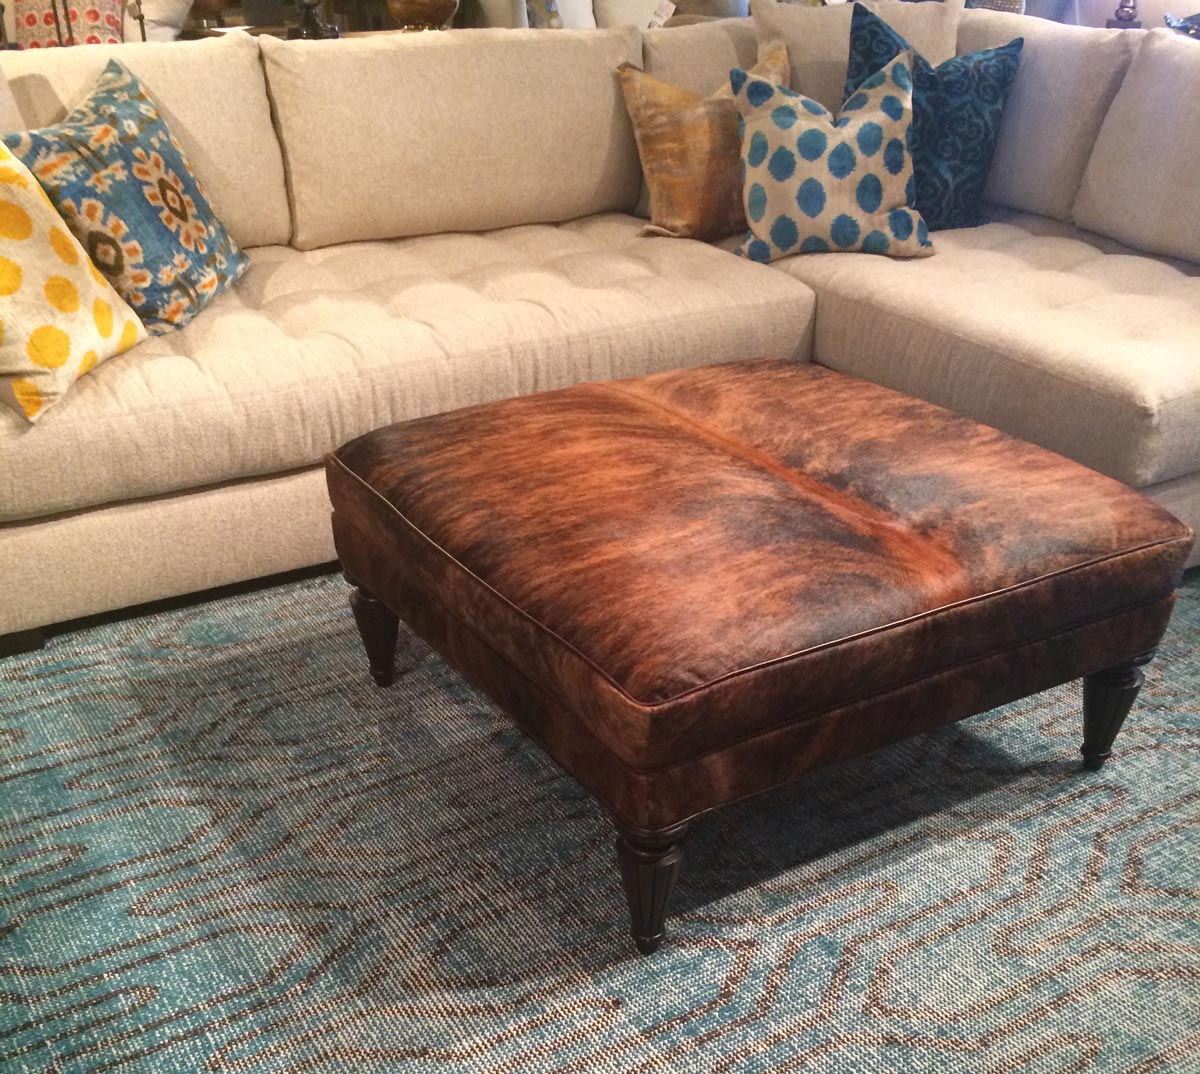 Who says quality home furnishings don’t exist anymore? You will find them at McNabb & Risley! - McNabb & Risley